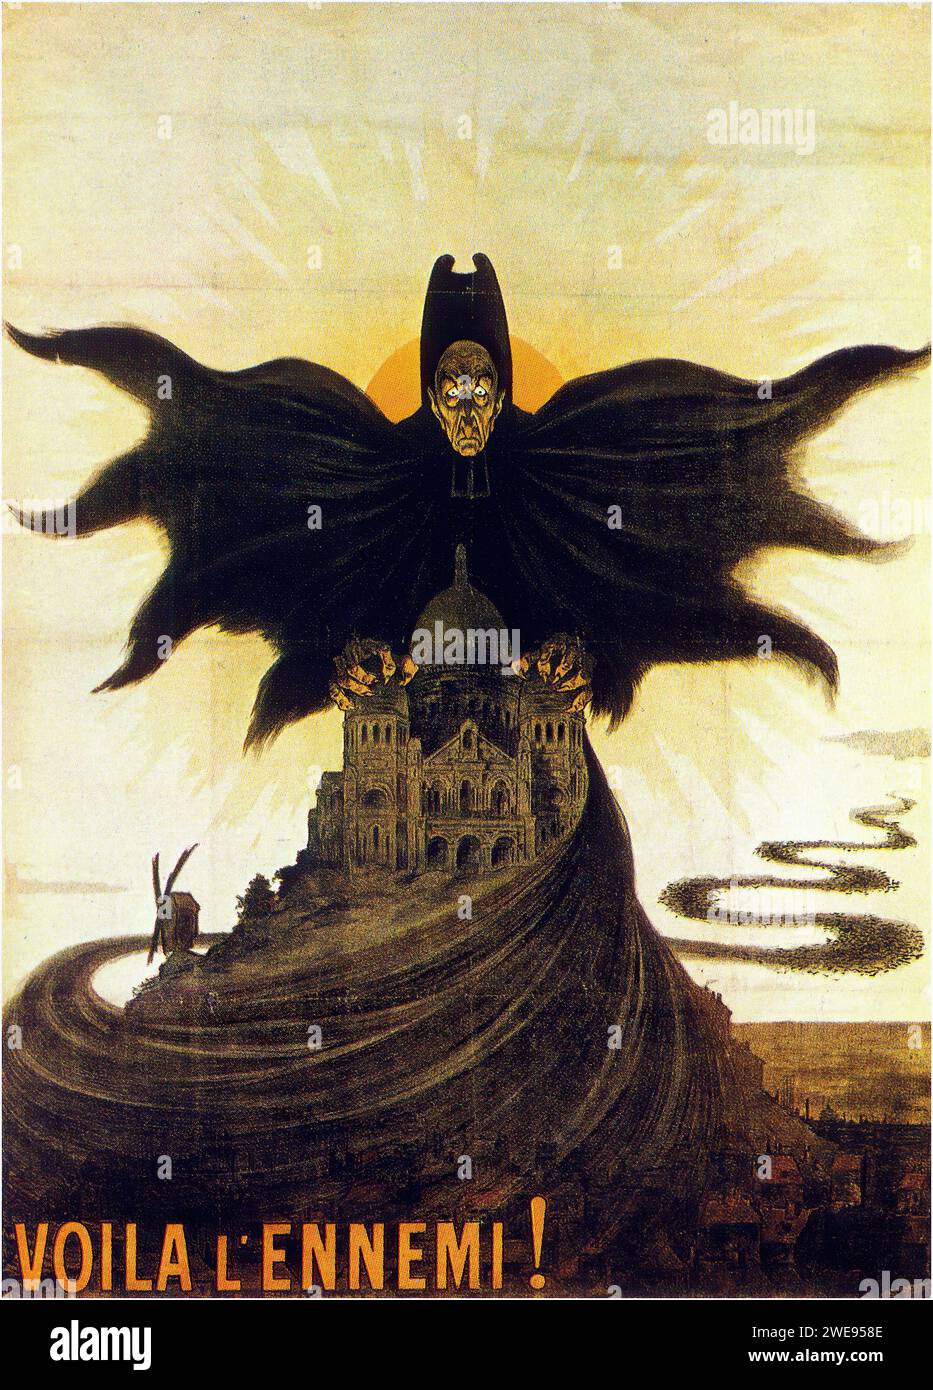 'VOILA L'ENNEMI!' ['HERE IS THE ENEMY!'] Vintage French Advertising portraying a menacing figure of a priest with a bat-like silhouette over Sacré-Coeur de Montmartre. The poster is in a propagandistic style with dark, foreboding imagery designed to evoke fear and patriotism. Stock Photo